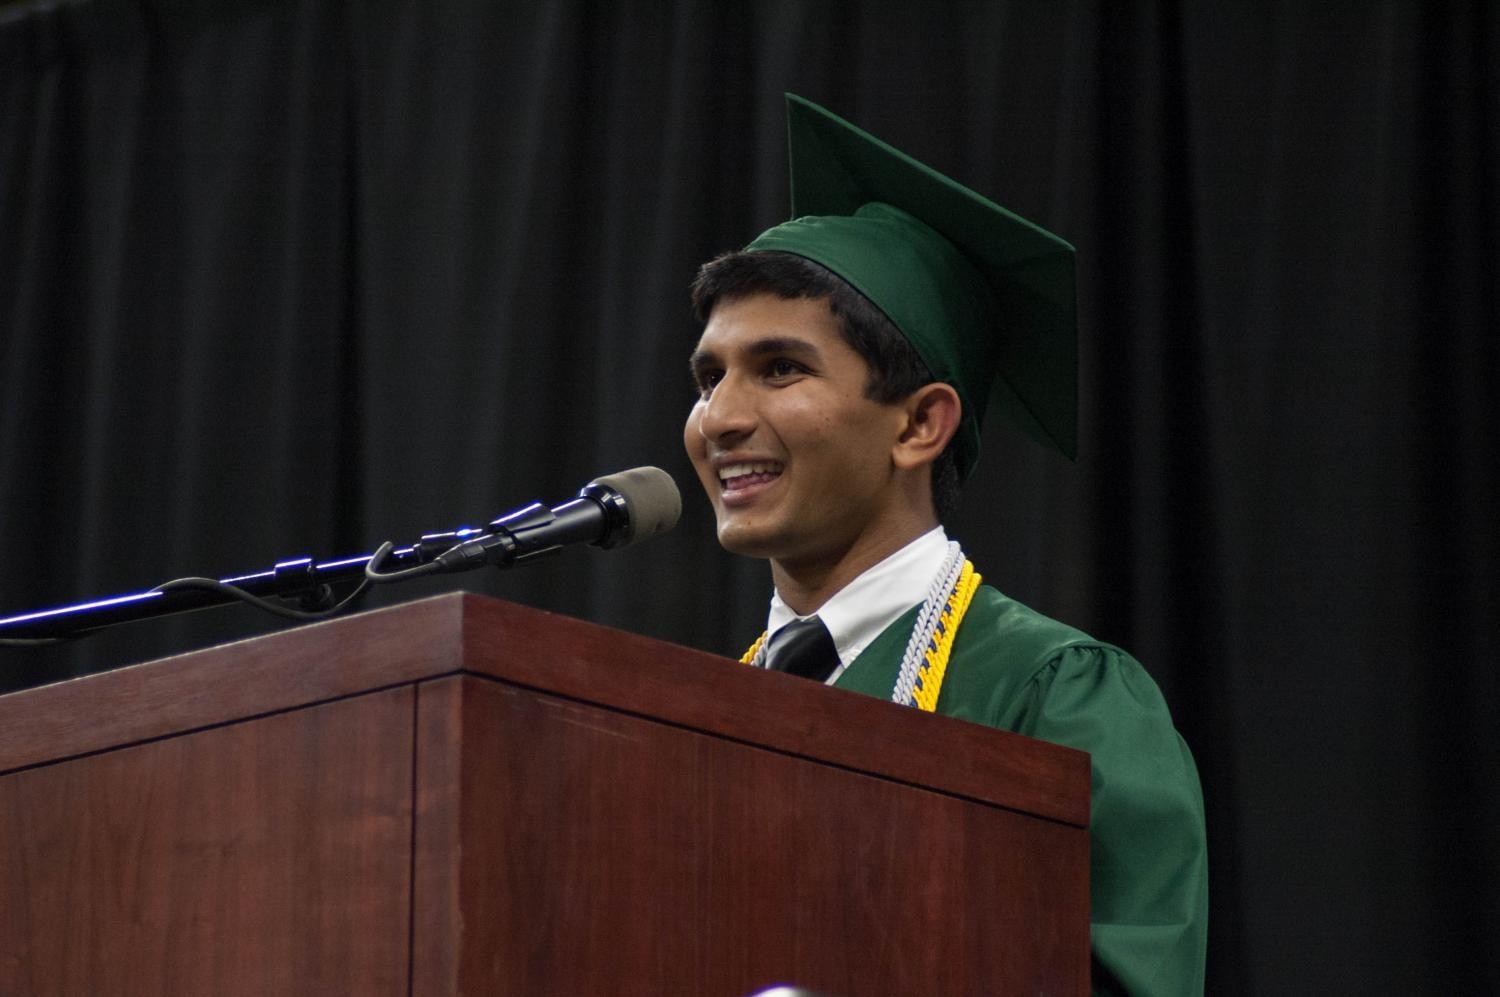 Senior Class President Michael Moonjely 17 gives the Senior Address to his peers on May 27 at Carver-Hawkeye Arena.